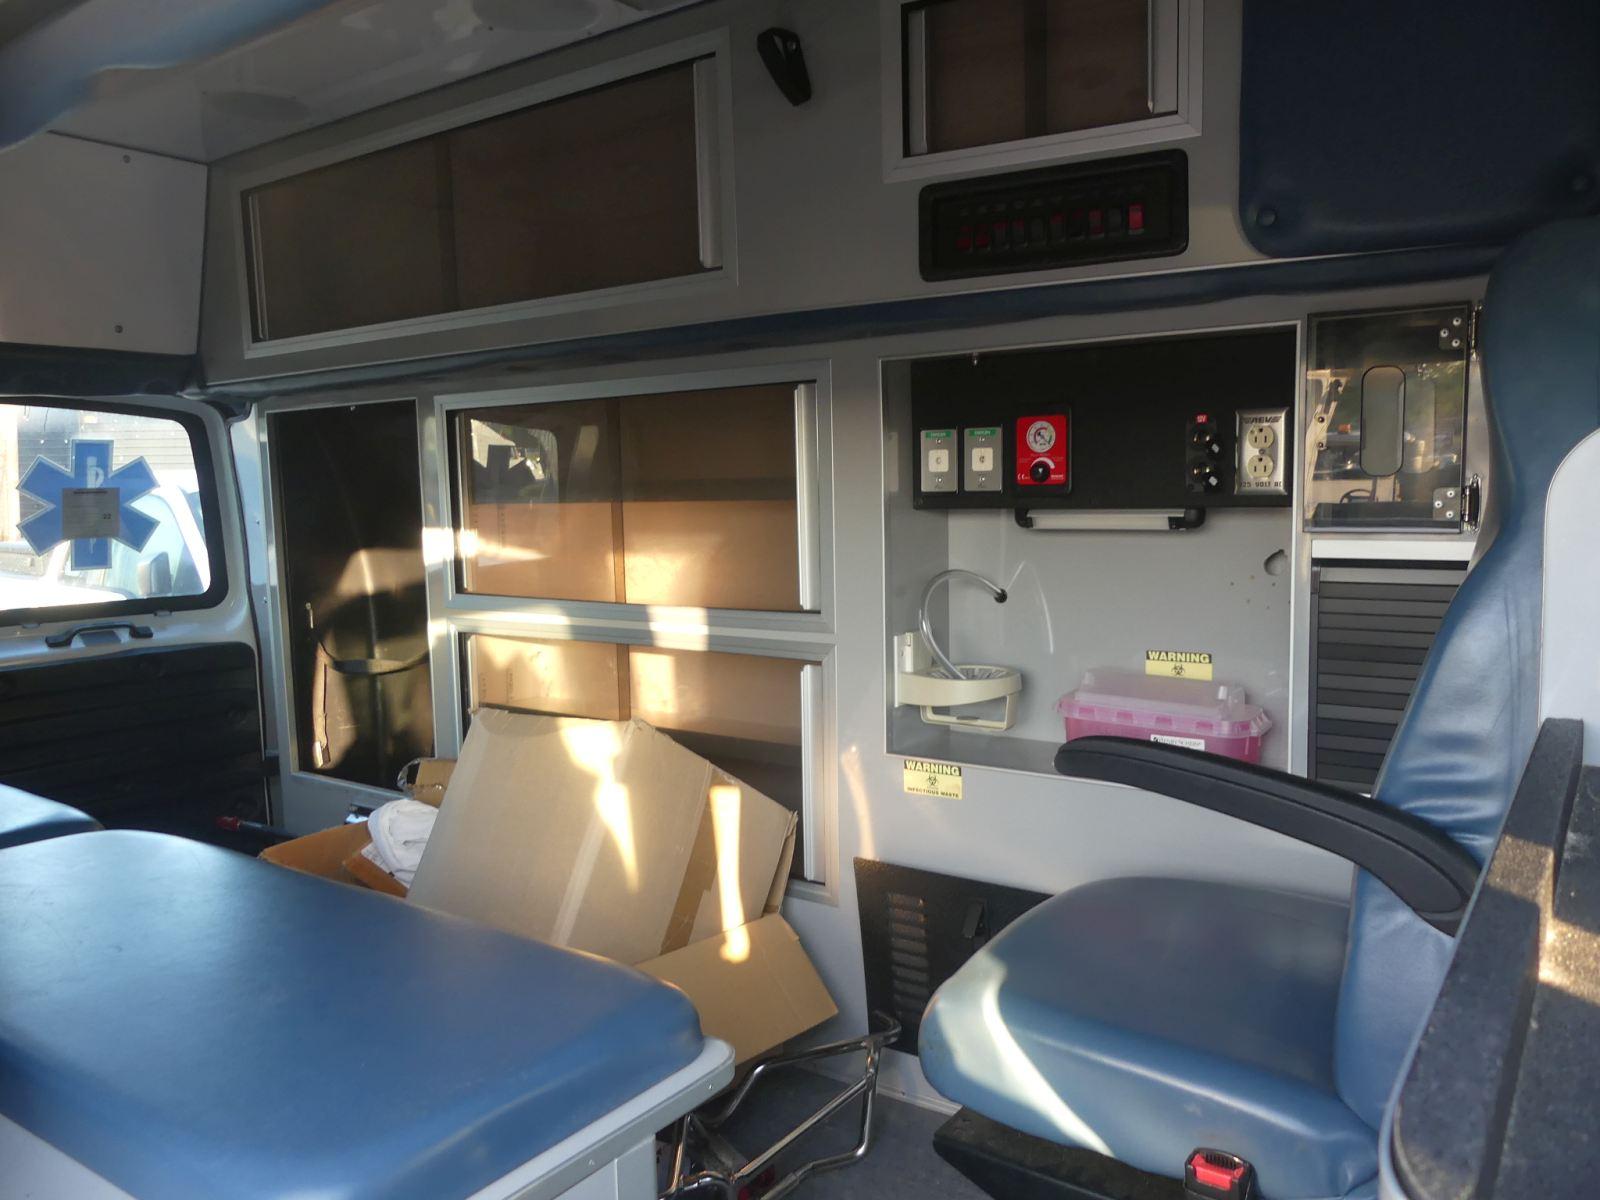 2015 Chevy Express Ambulance, s/n 1GBZGUCL8F1249461 (Inoperable): Duramax D